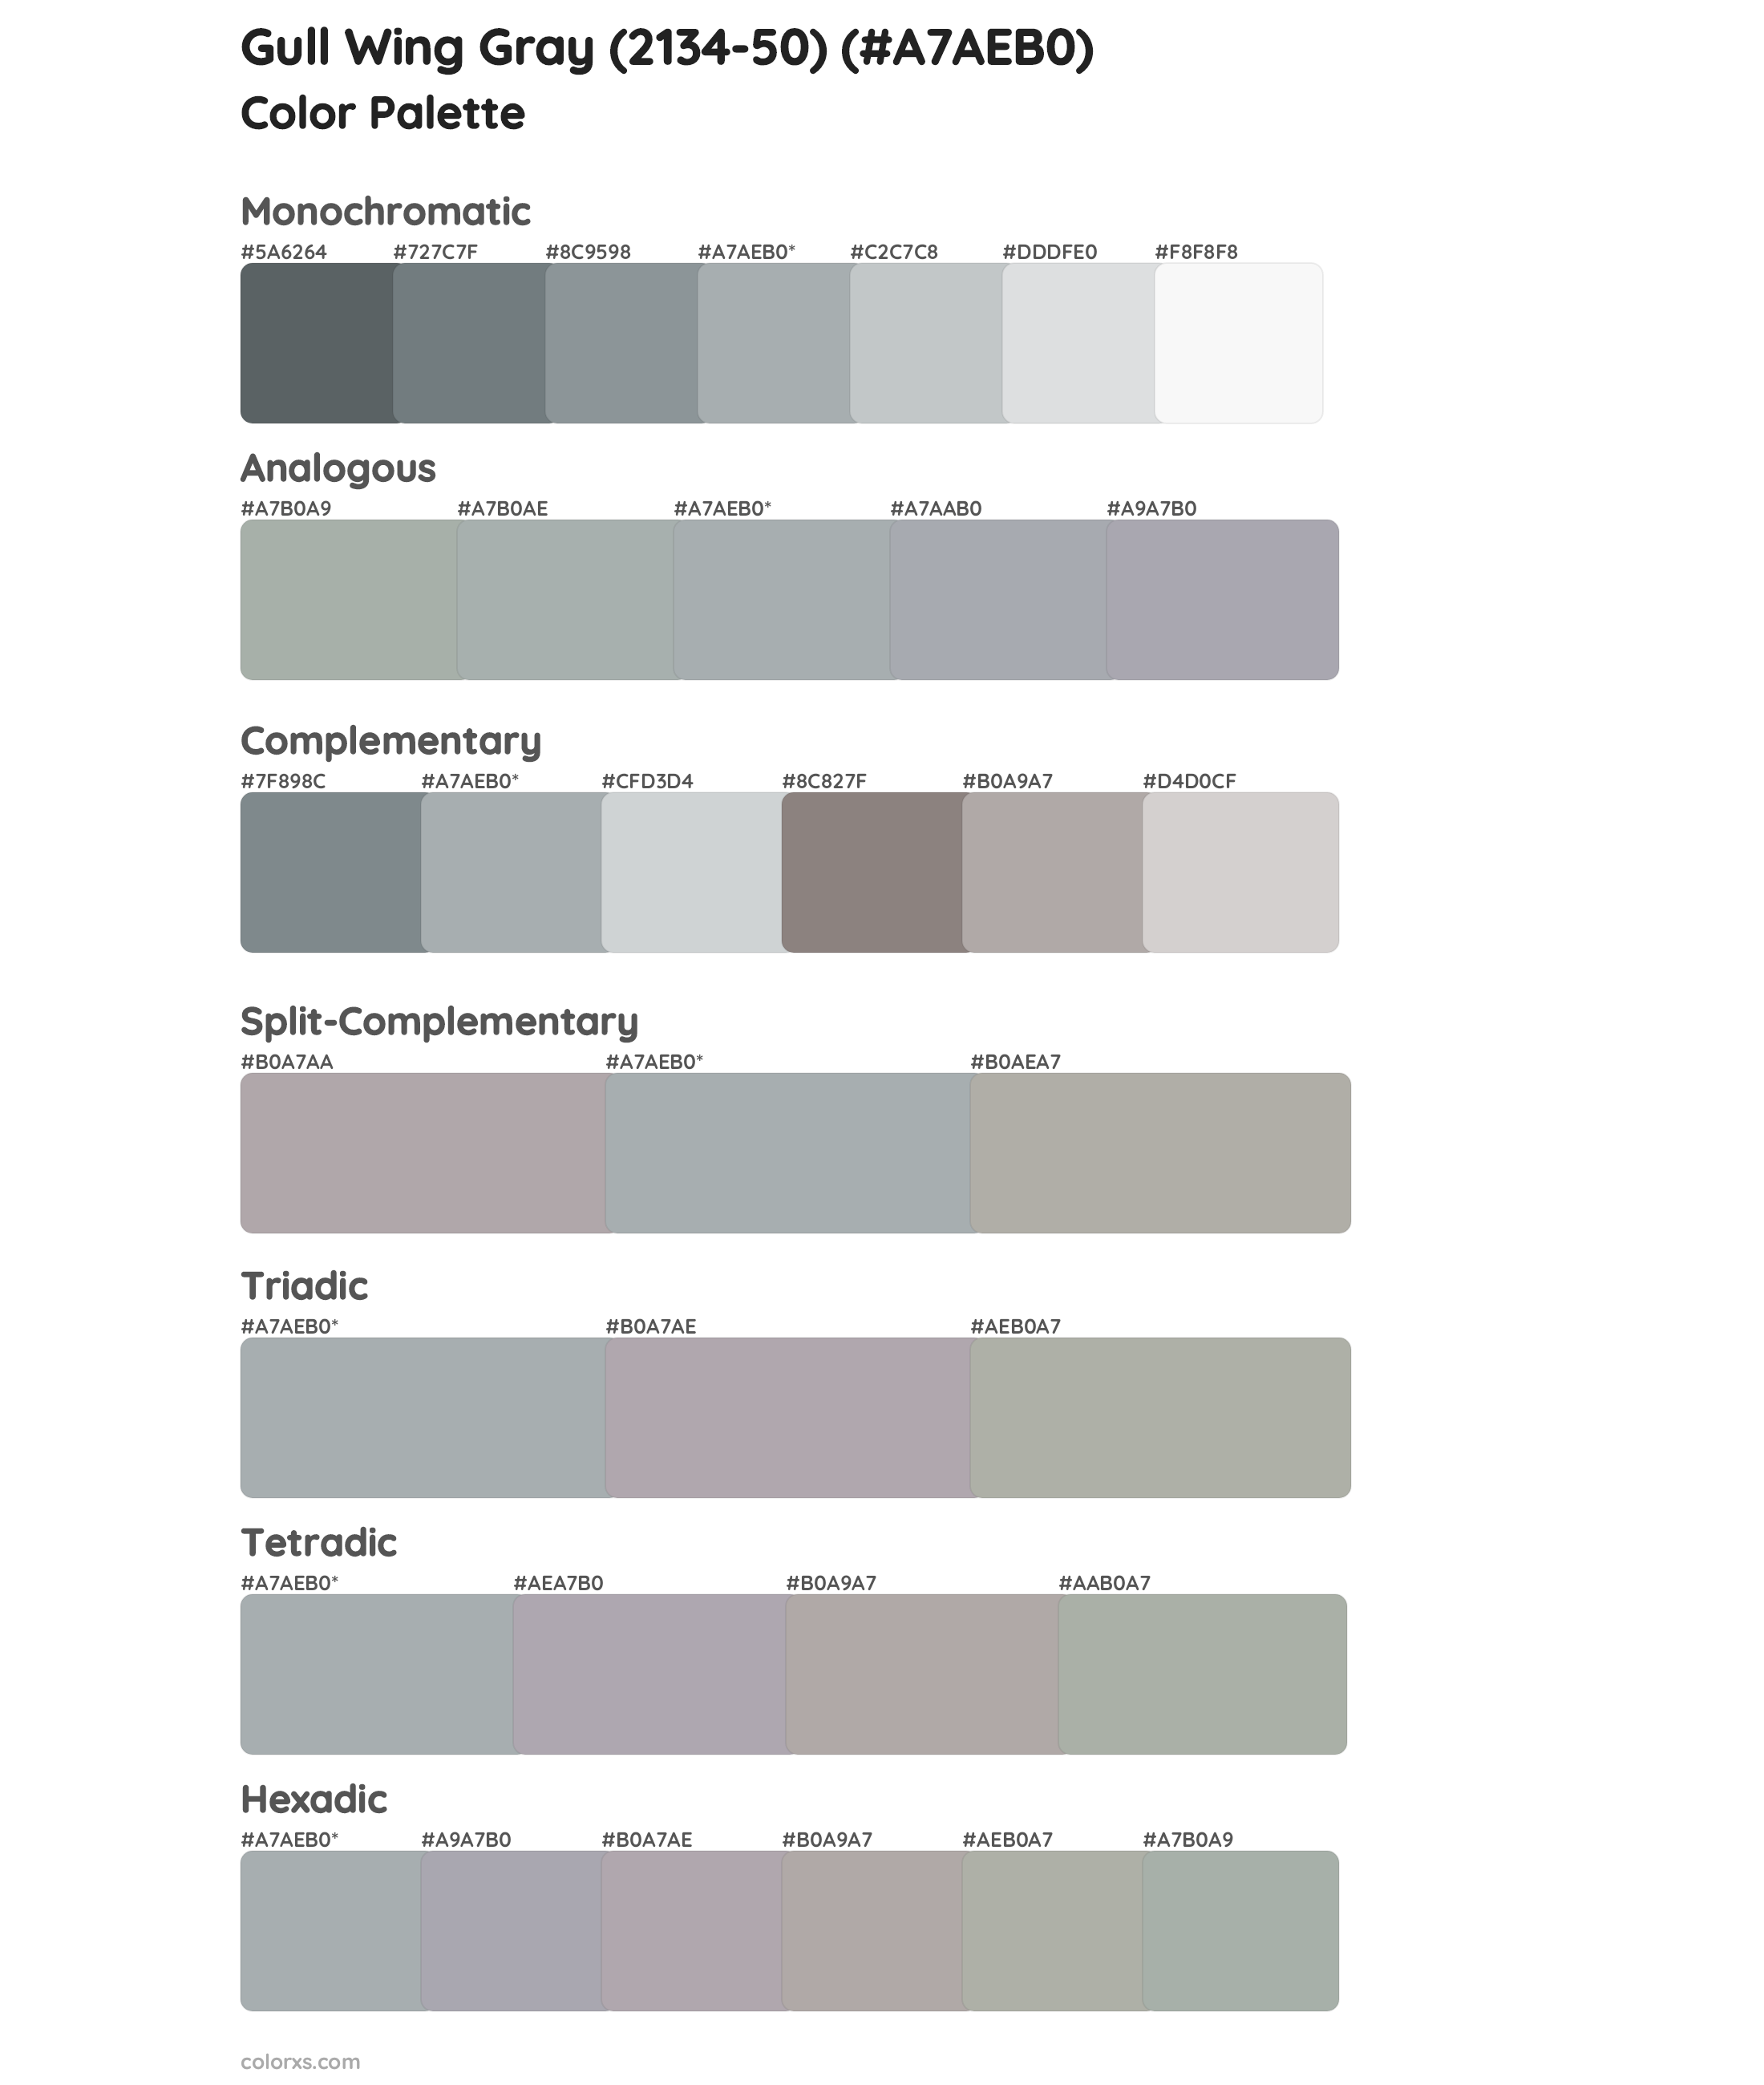 Gull Wing Gray (2134-50) Color Scheme Palettes